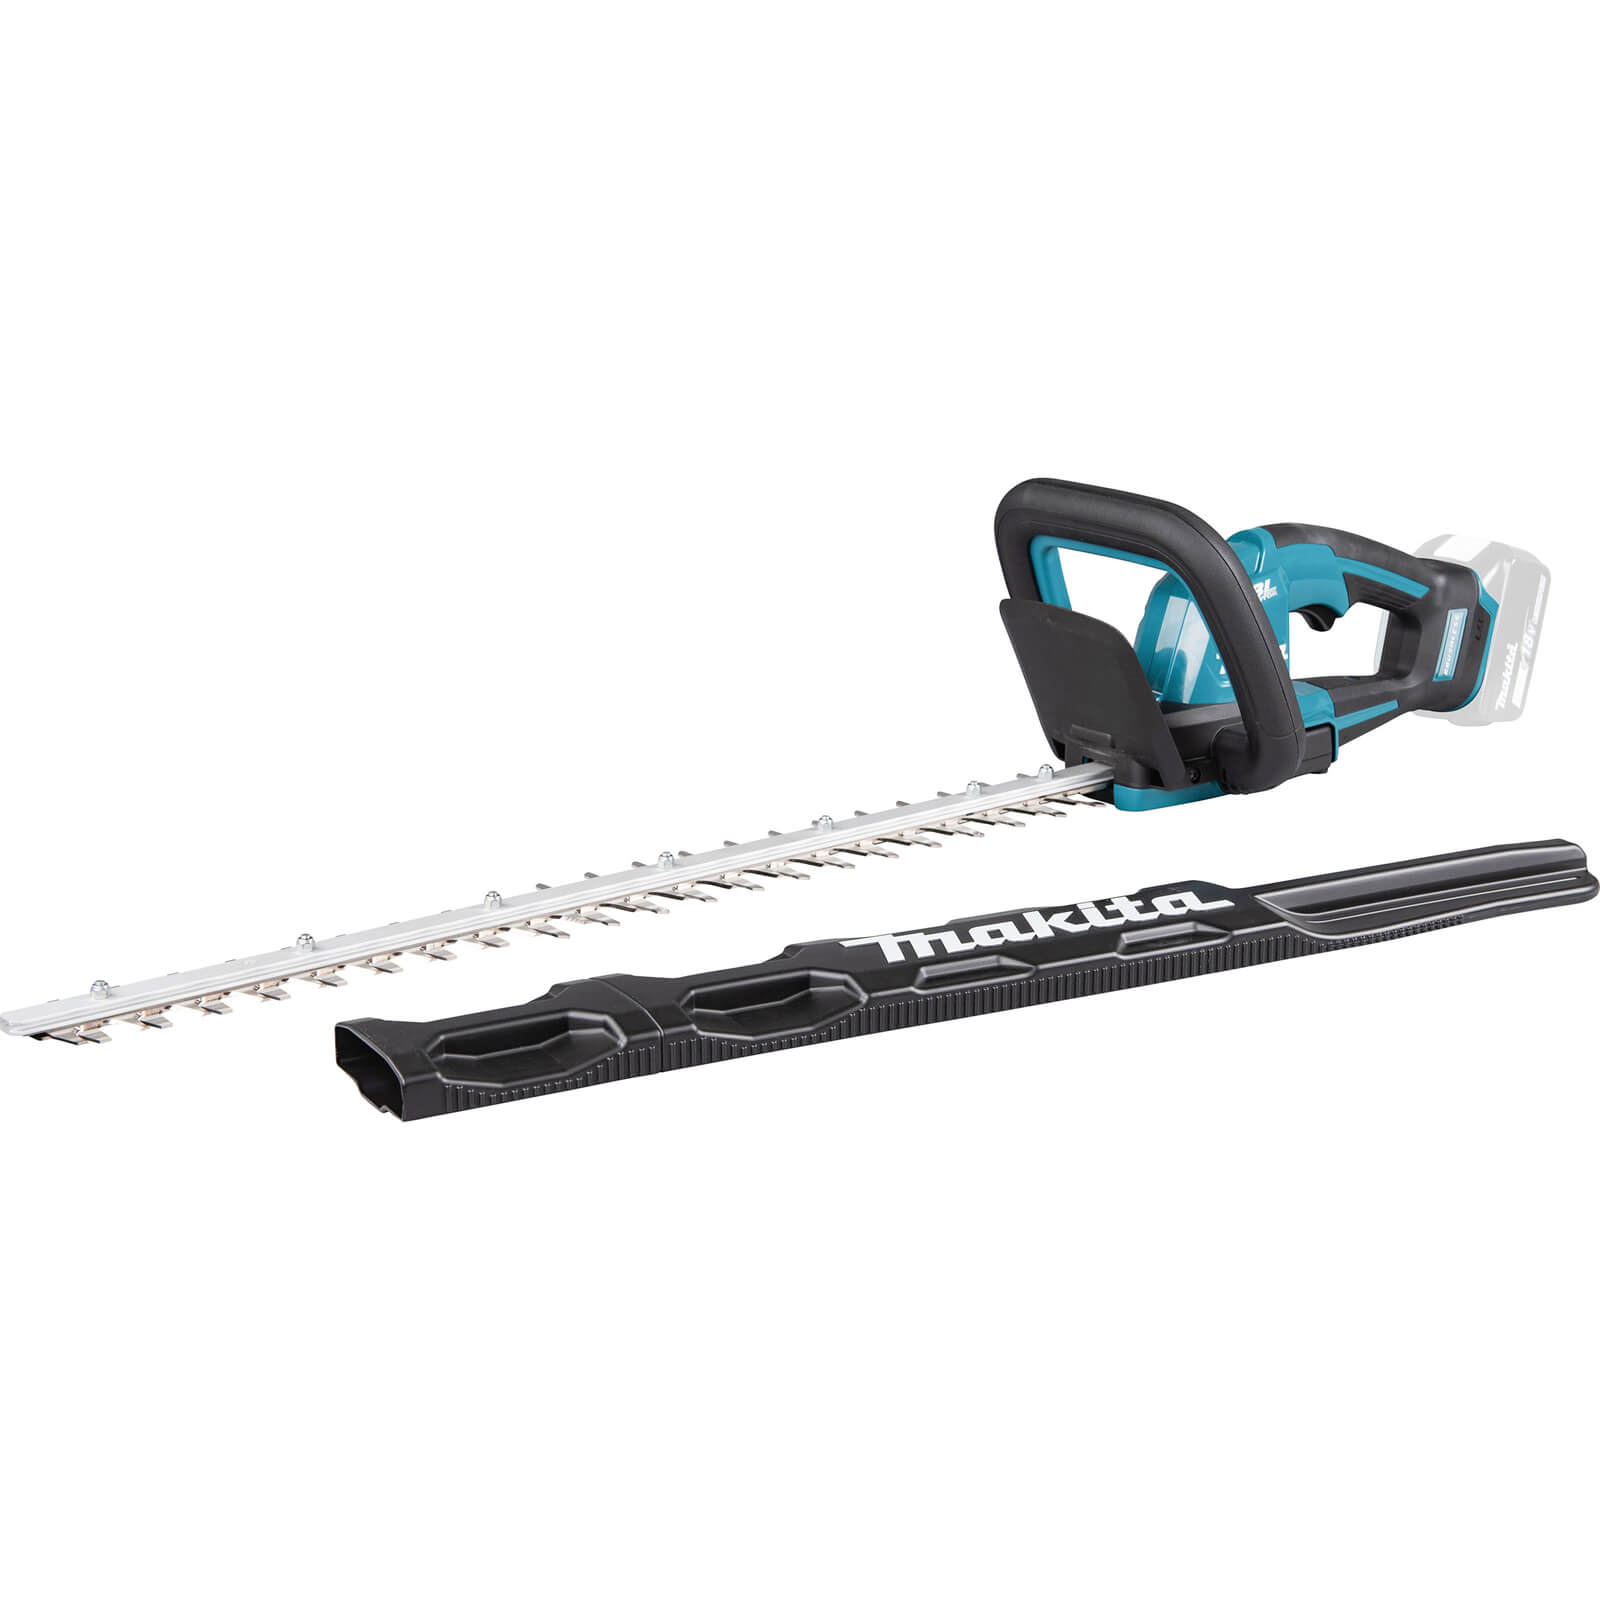 Makita DUH606 18v LXT Cordless Brushless Hedge Trimmer 600mm No Batteries No Charger